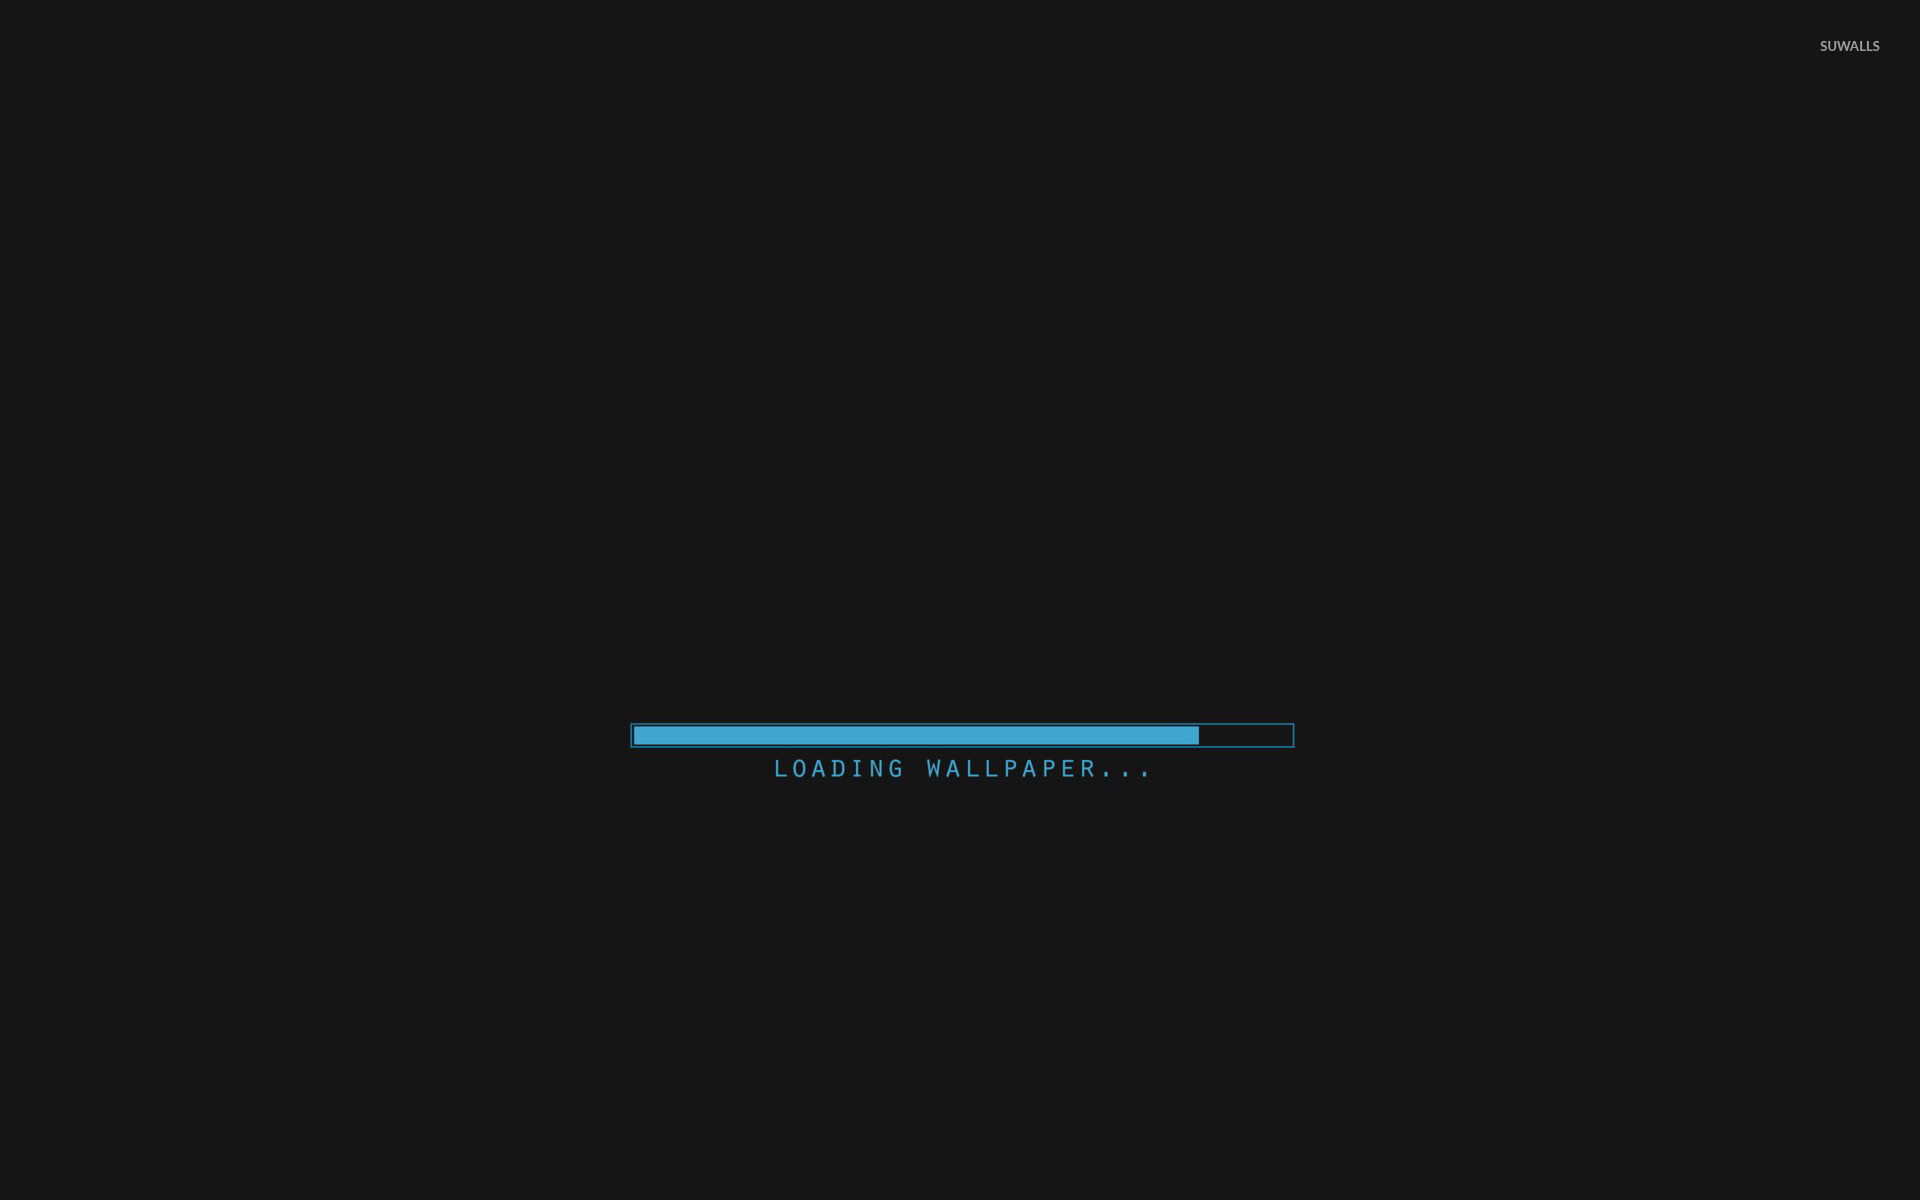 loading wallpapers